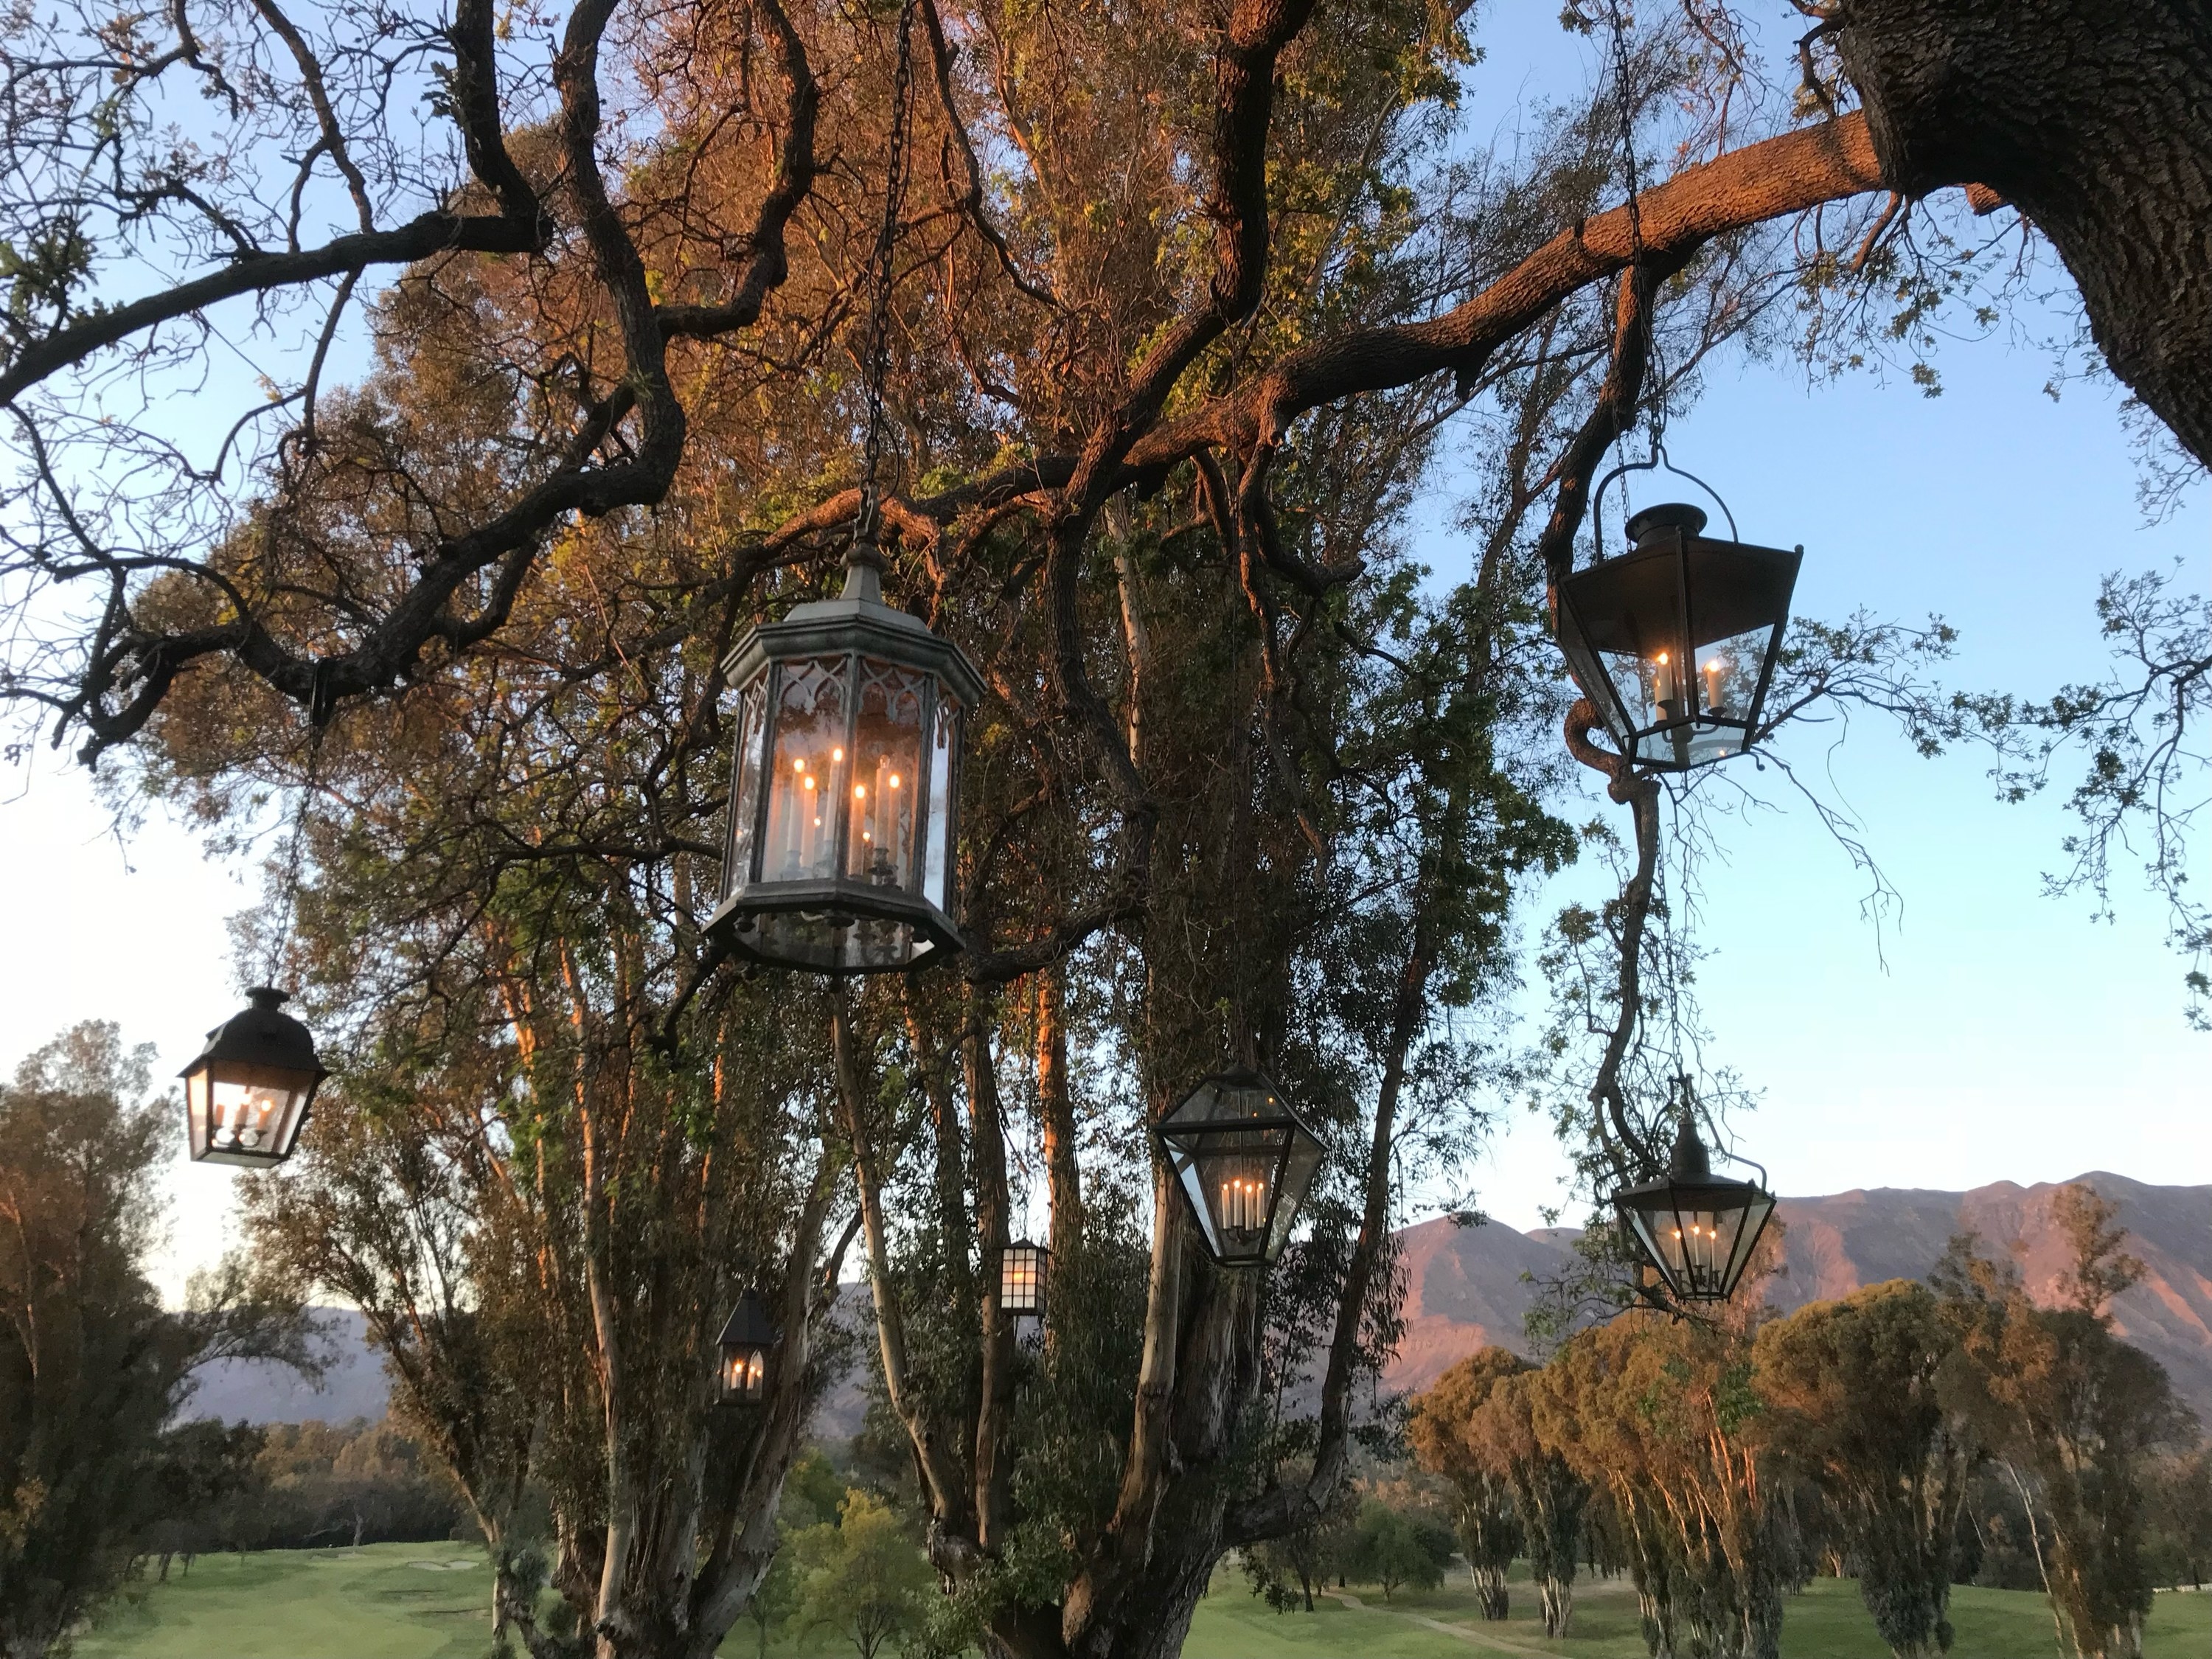 Lanterns hanging from the branches of an oak tree with mountains lit pink by the setting sun in the distance